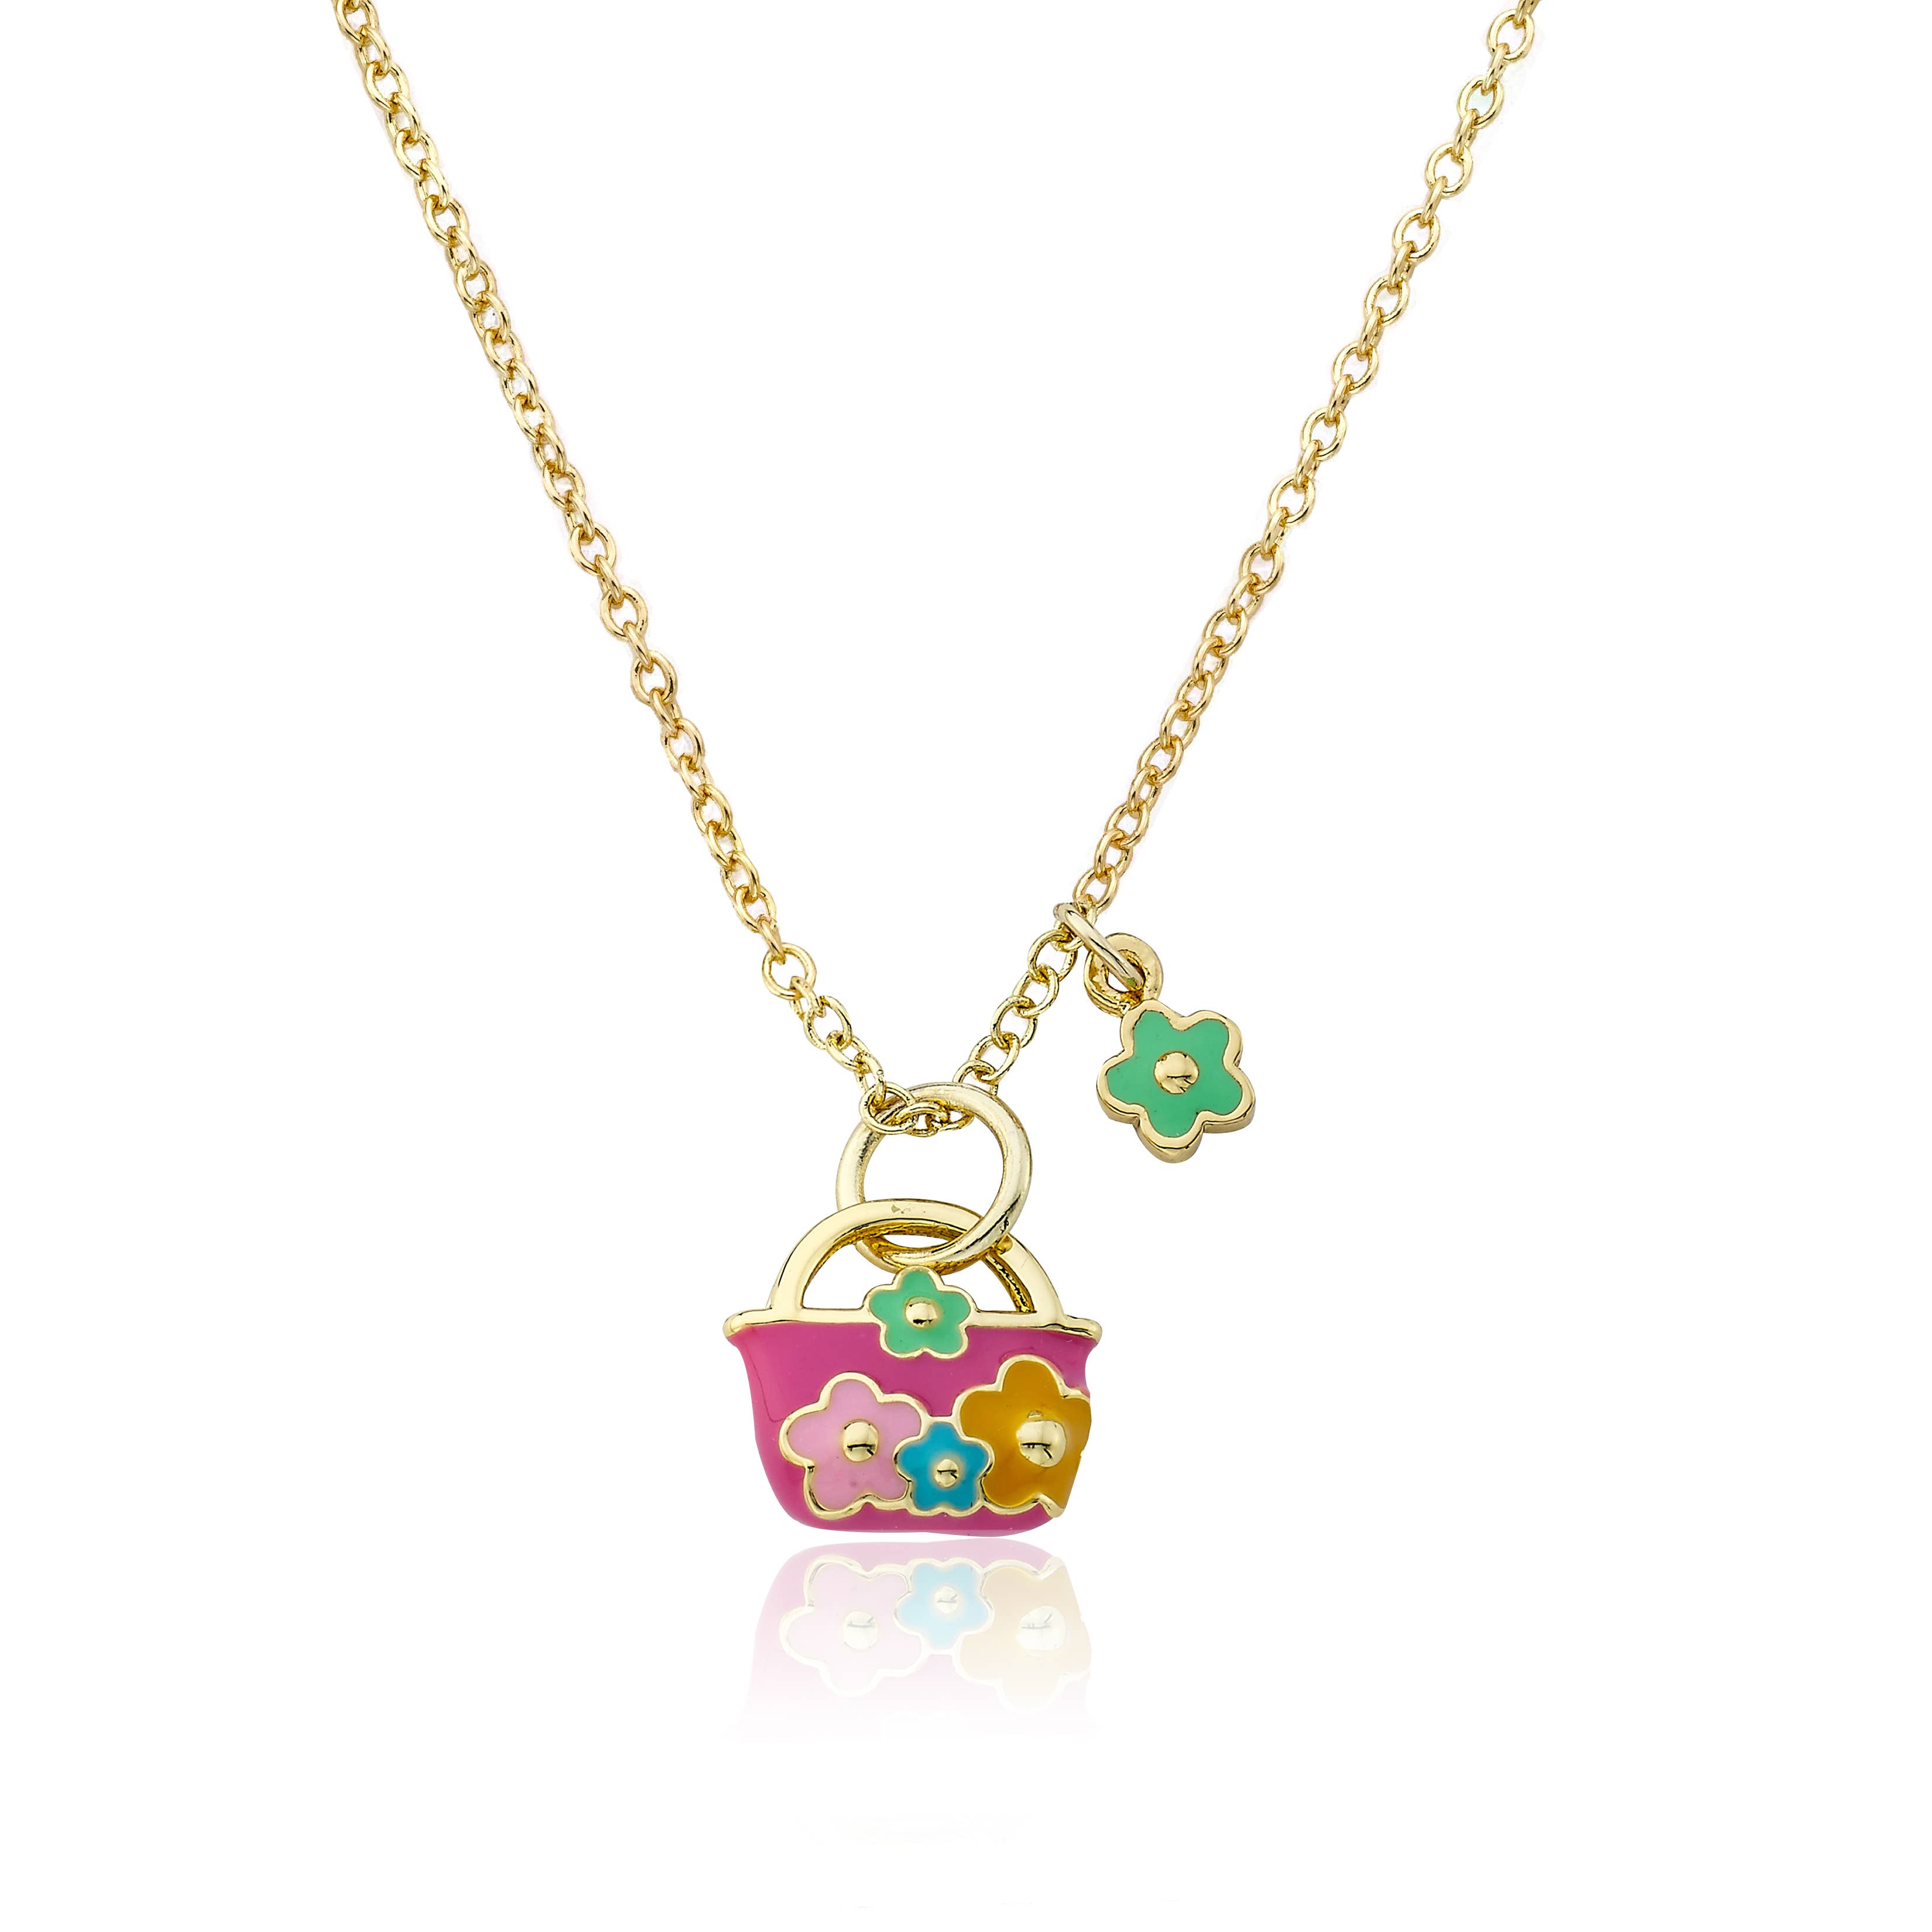 Gold Rose Zama and Enamel 4 necklace available in 2 colors